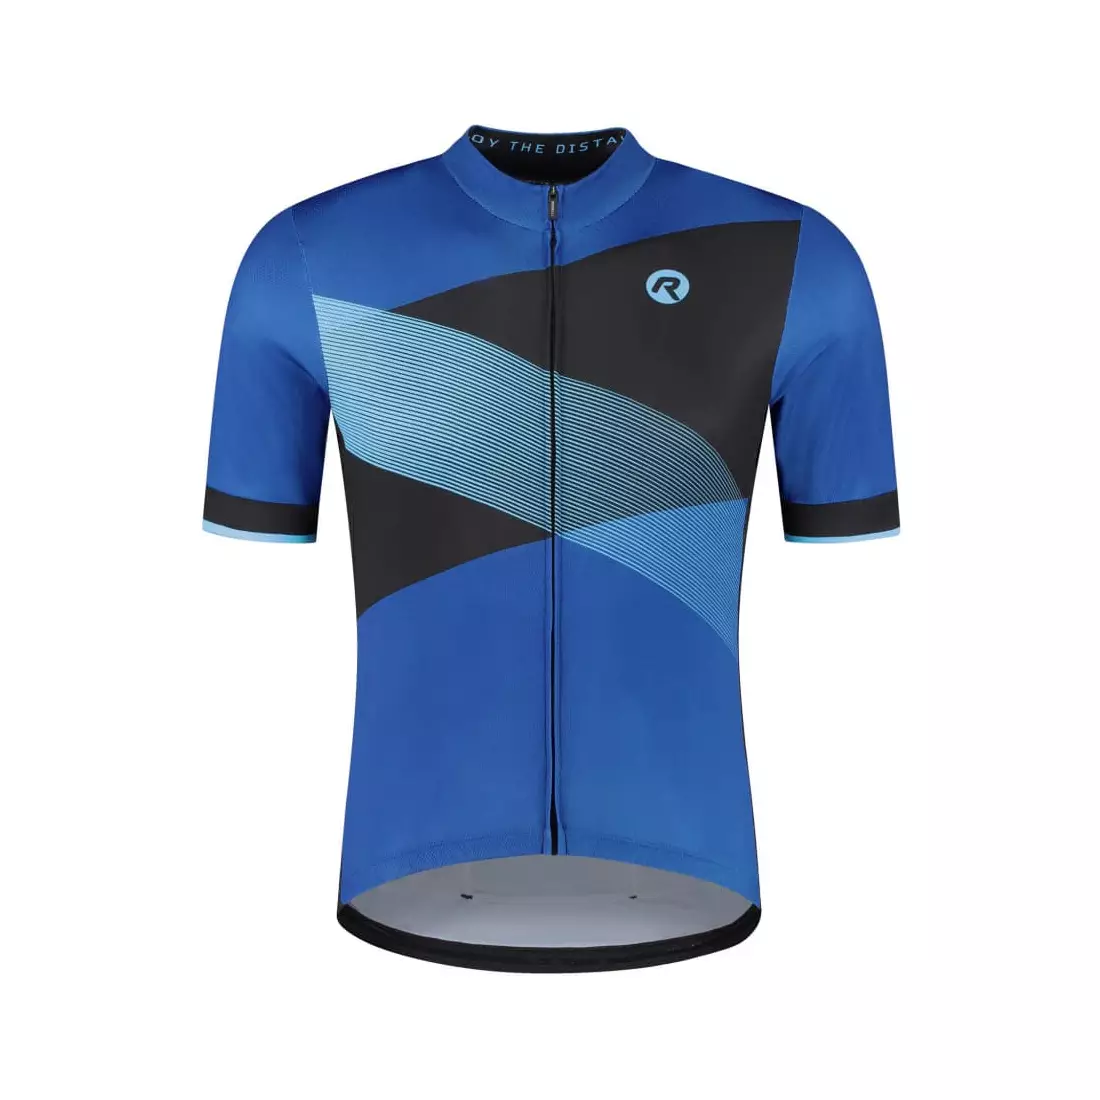 Rogelli GROOVE men's cycling jersey, blue